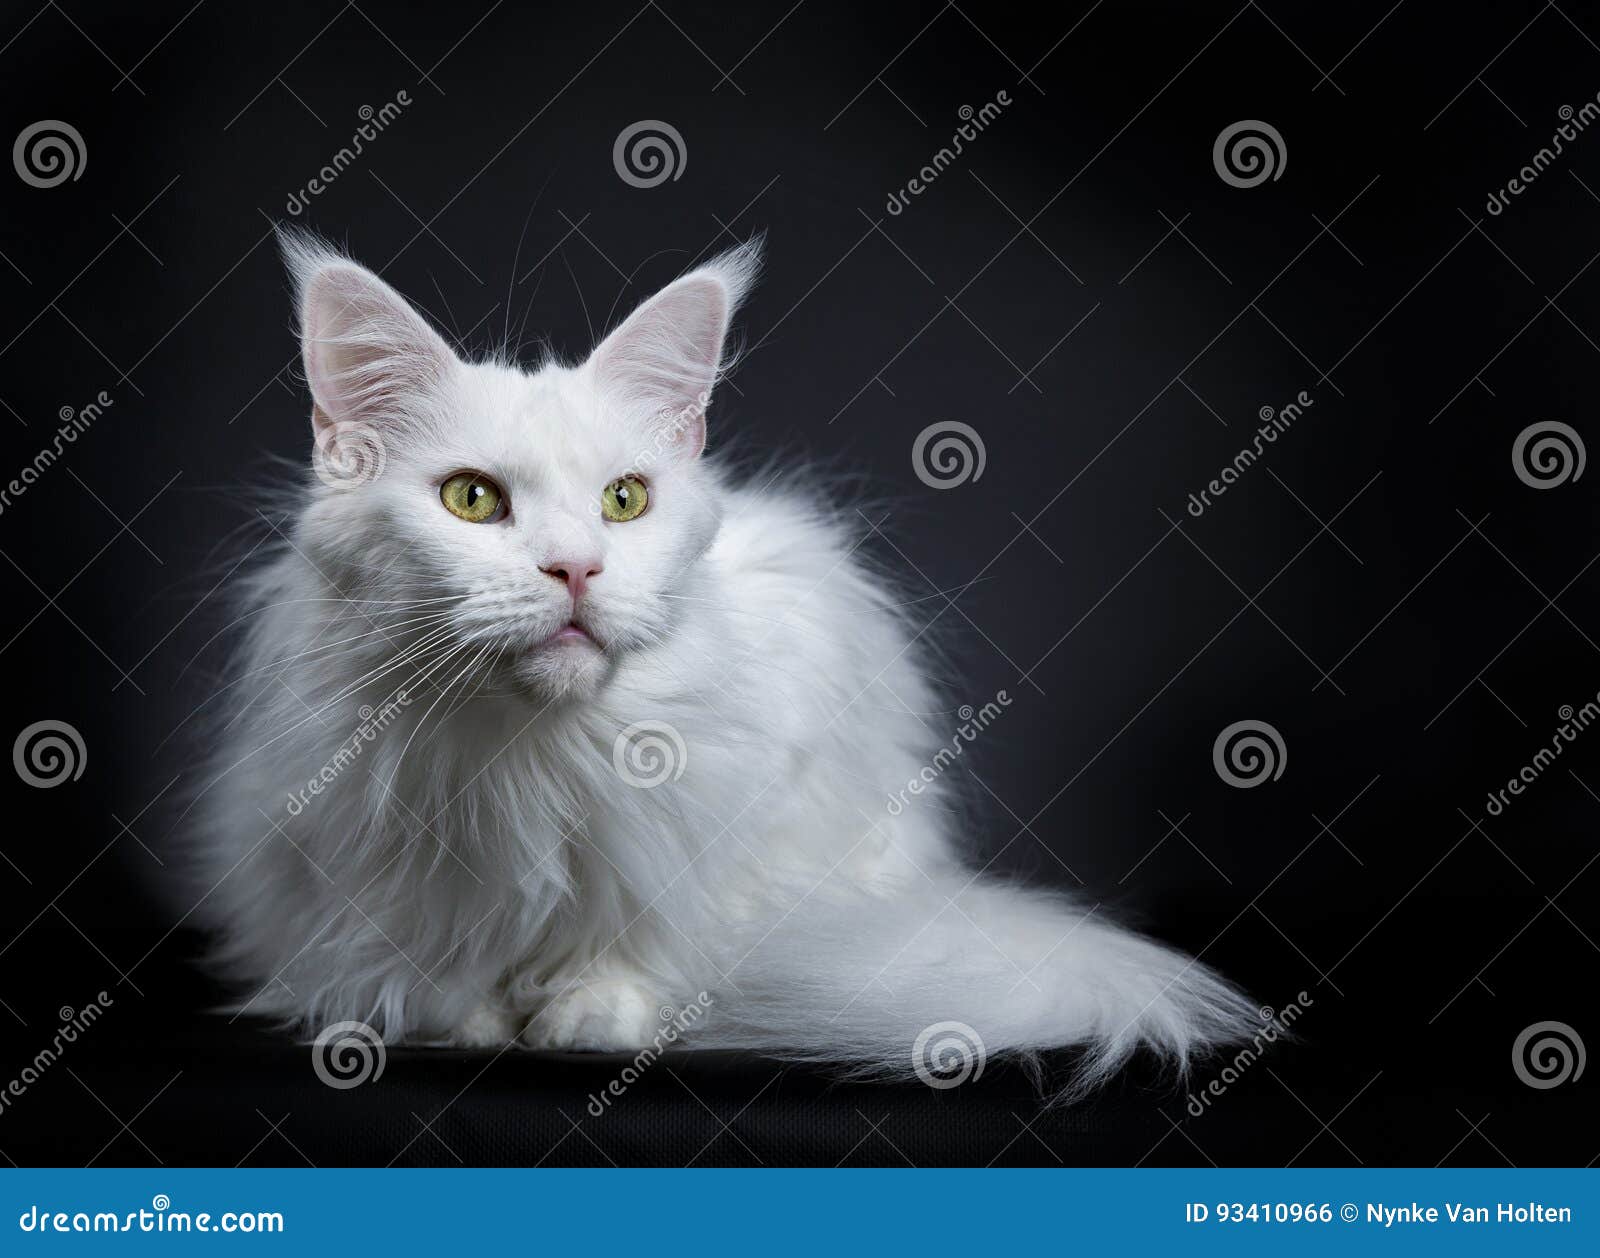 Solid White Maine Coon Cat Laying On Black Background Stock Photo Image Of Background Coon 93410966